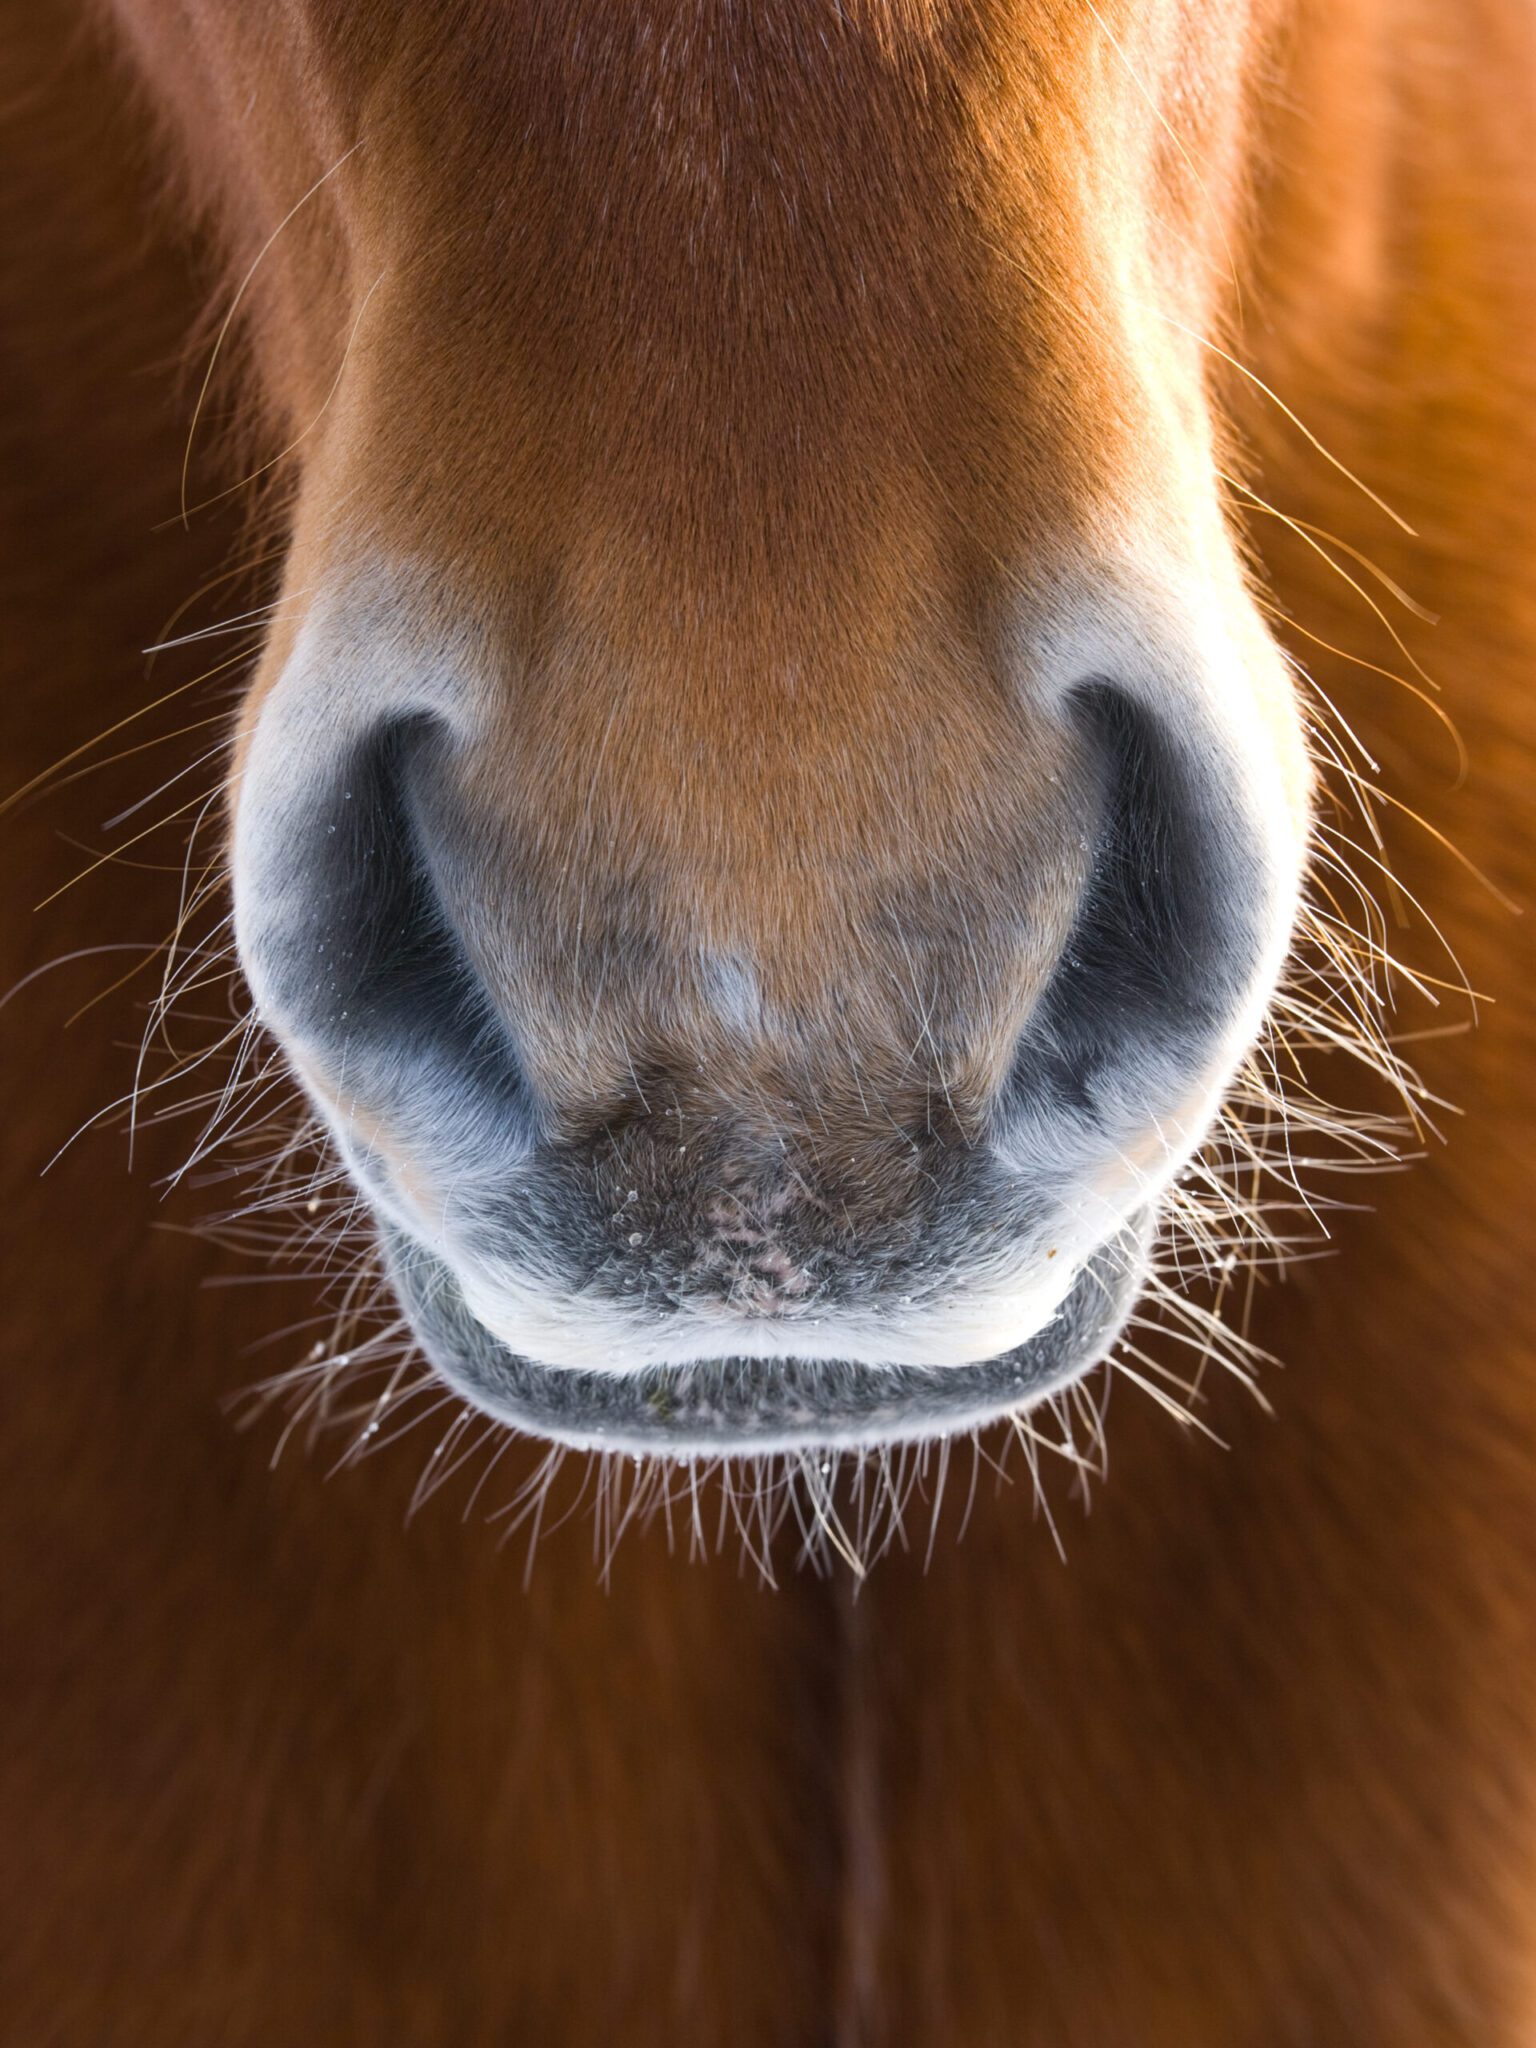 An abstract shot of the muzzle of a chestnut horse